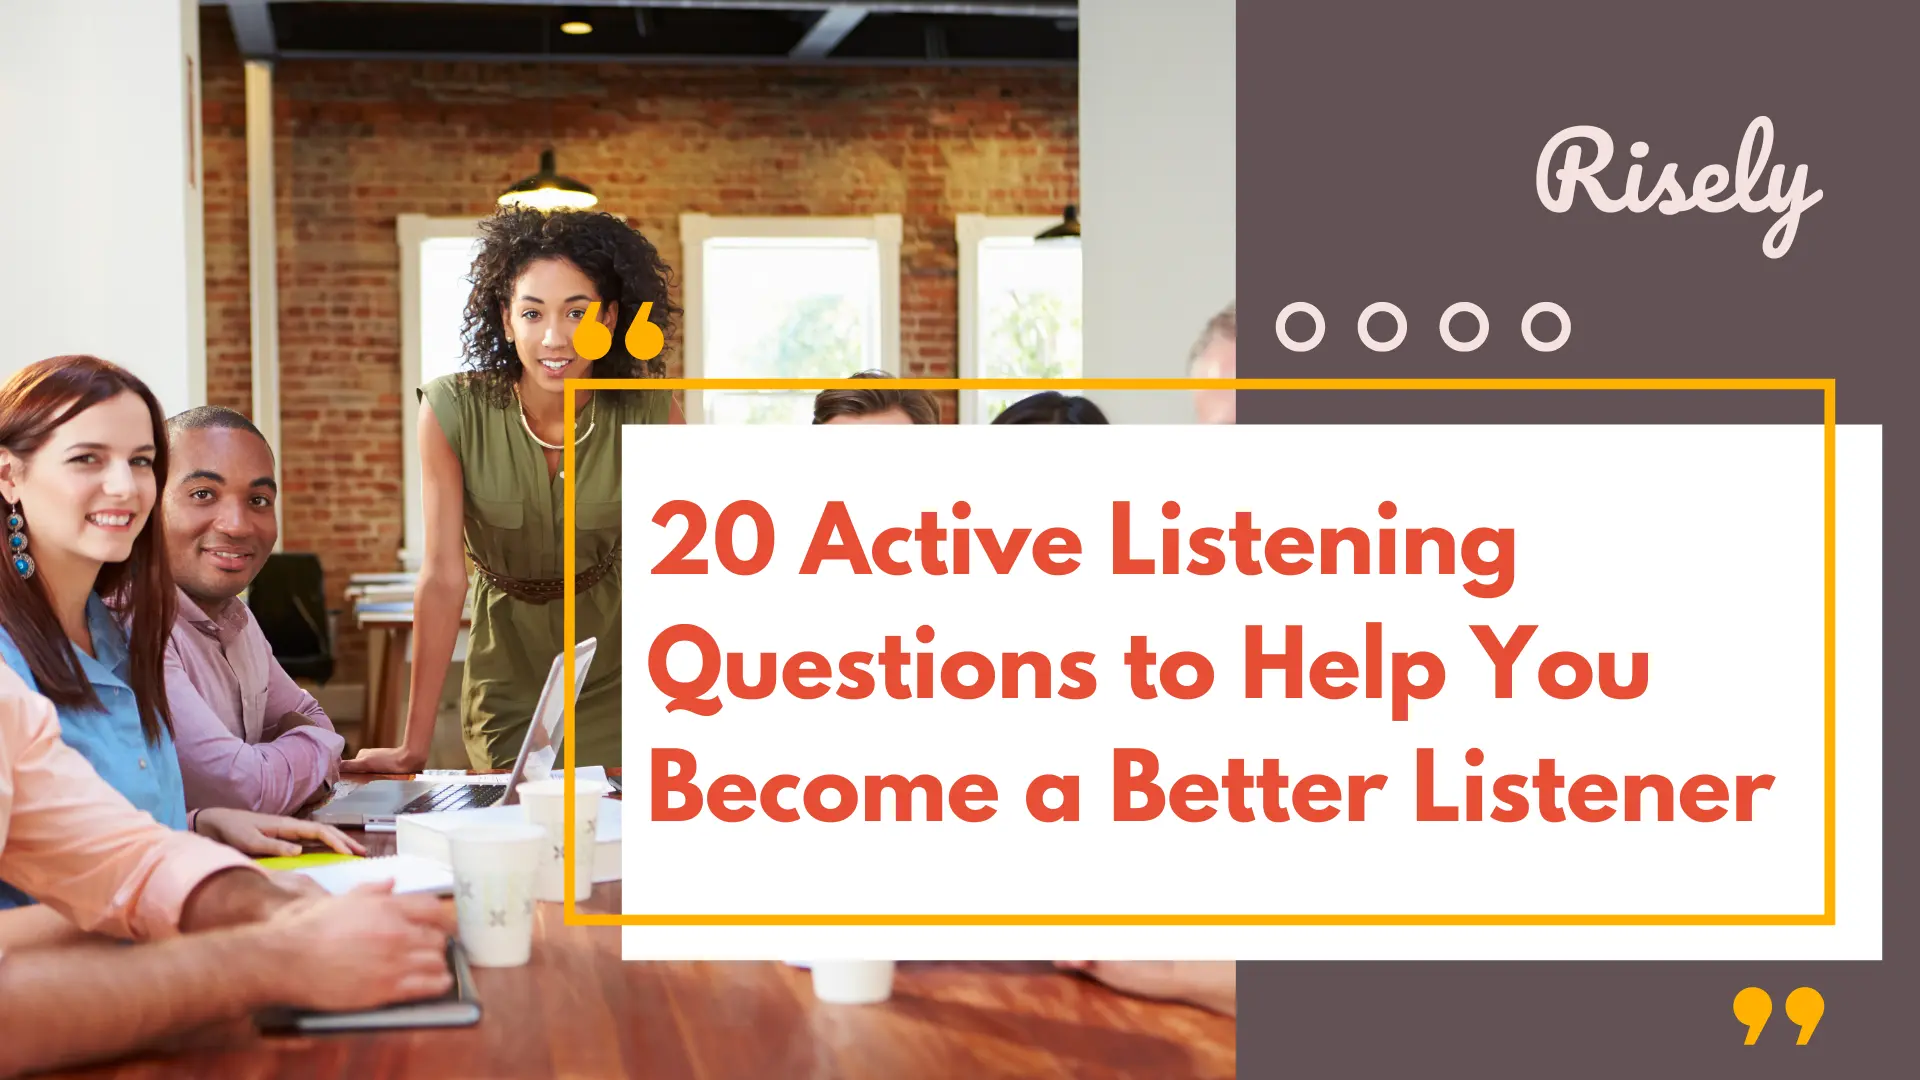 20 Active listening questions to help you become a better listener - Risely